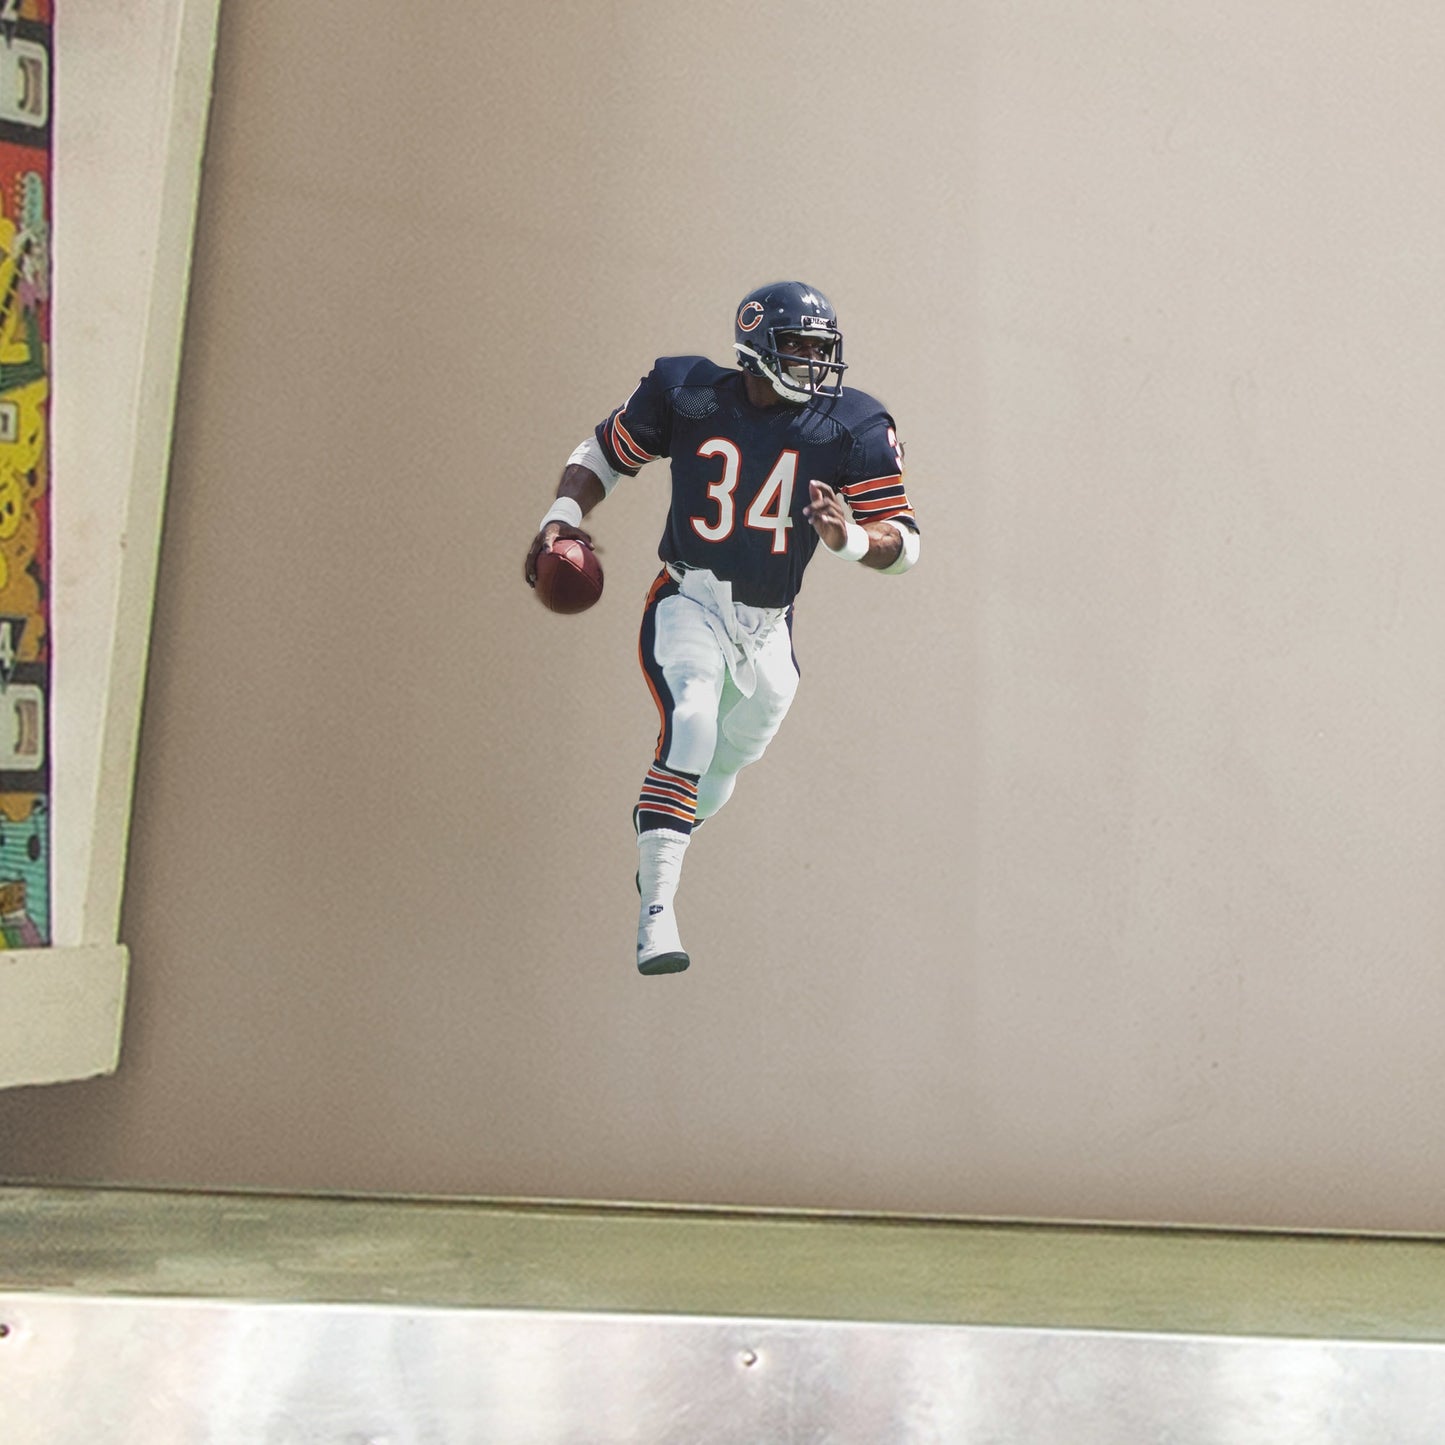 Large Athlete + 2 Decals (9"W x 16.5"H) They called him Sweetness, a player whose heart was as big as his talent. A 9-time Pro Bowler and 1985 Super Bowl champion, Walter Payton widely is regarded as one of the greatest running backs of all time. Now fans of Da Bears can honor the late Hall of Famer with a removable wall decal set. Perfect for a bedroom or bonus room, the heavy-duty vinyl decals are easy to attach and remove. Bear down!